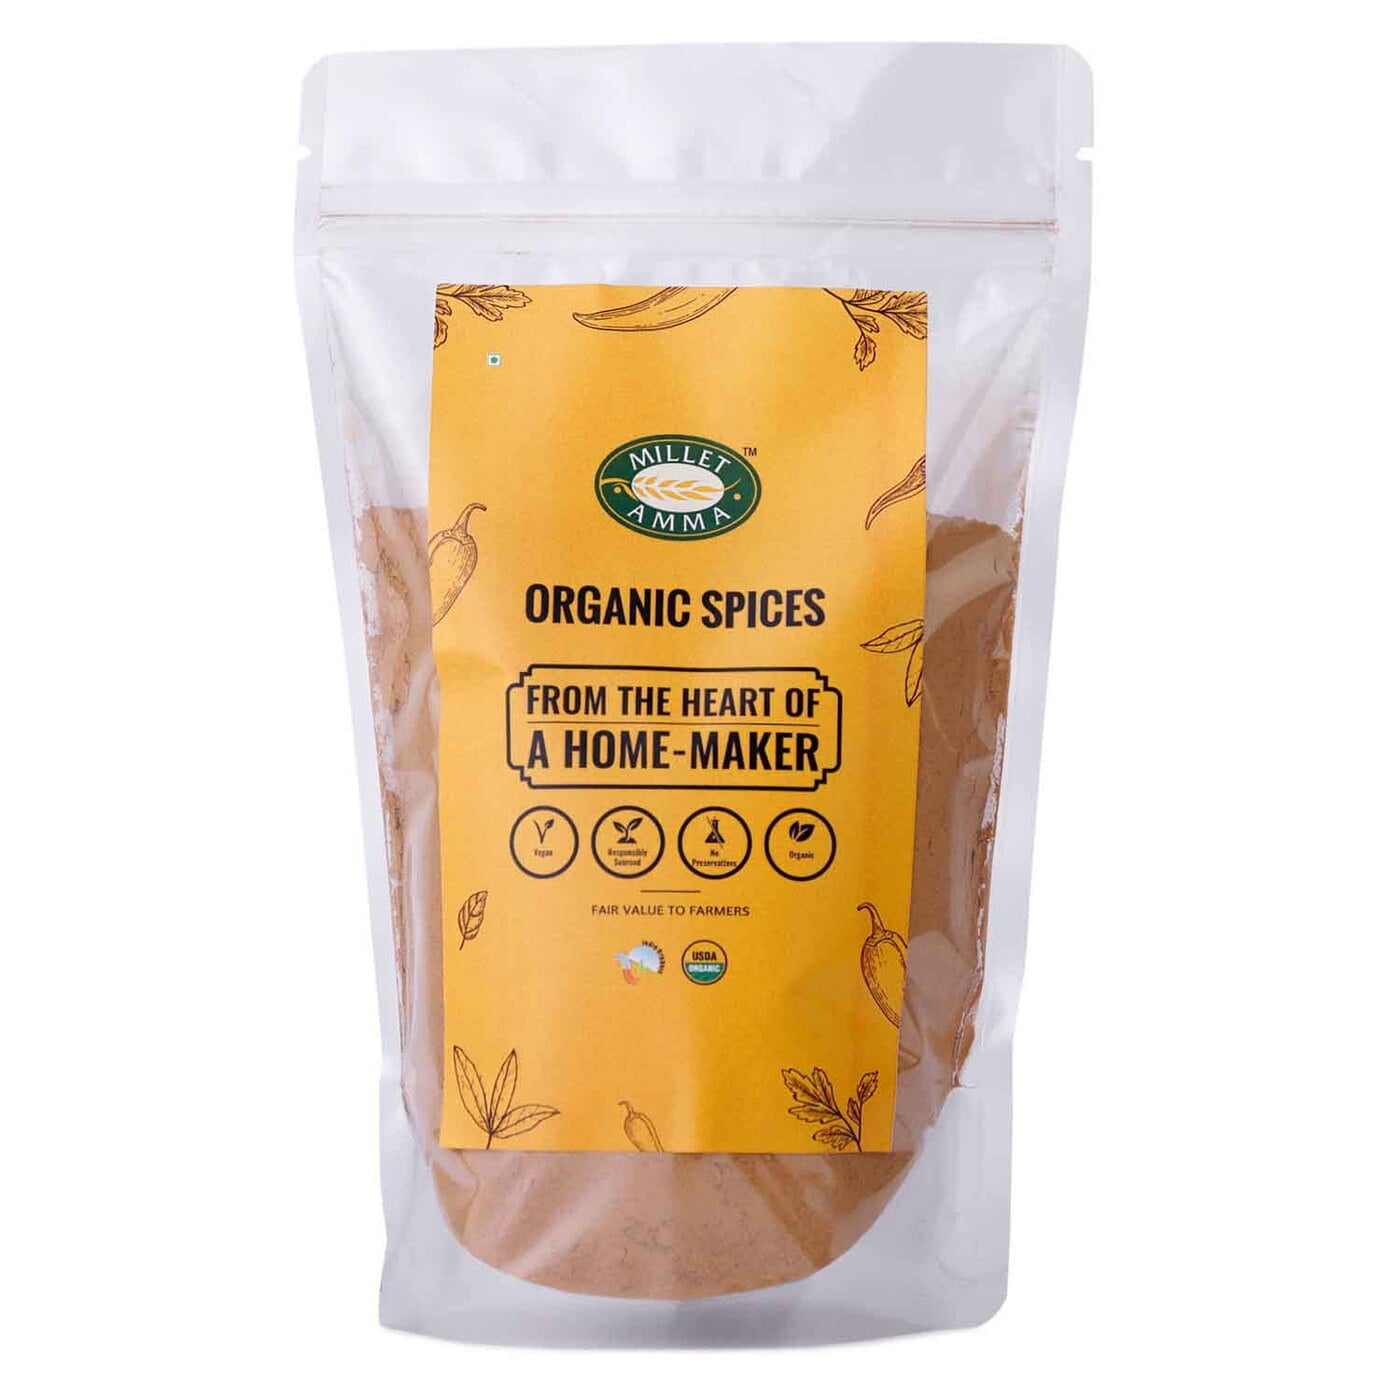 Milletamma’s dry mango powder has high number of phenolic compounds that play a significant role in the prevention of many chronic diseases due to their antioxidant, anti-inflammatory and anti-carcinogenic properties  It helps to accelerate digestion.